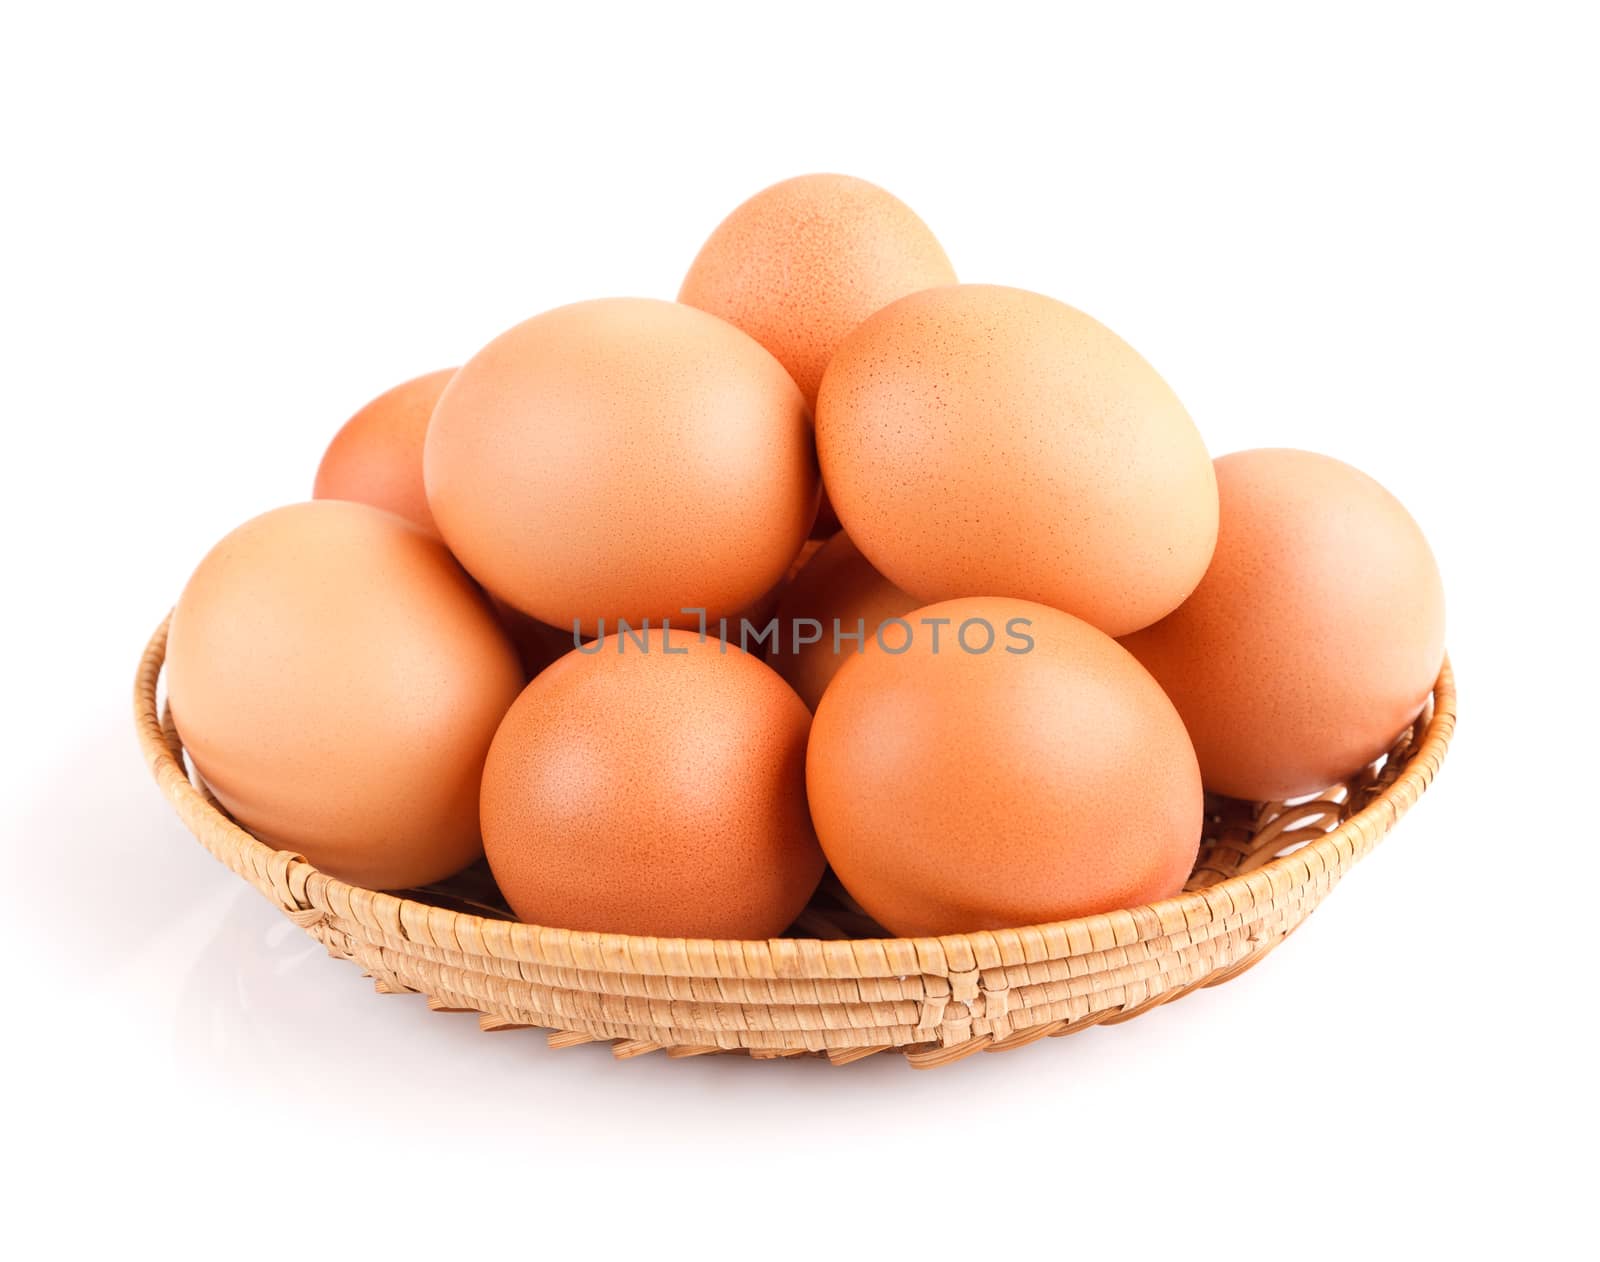 eggs in a bowl isolated on white